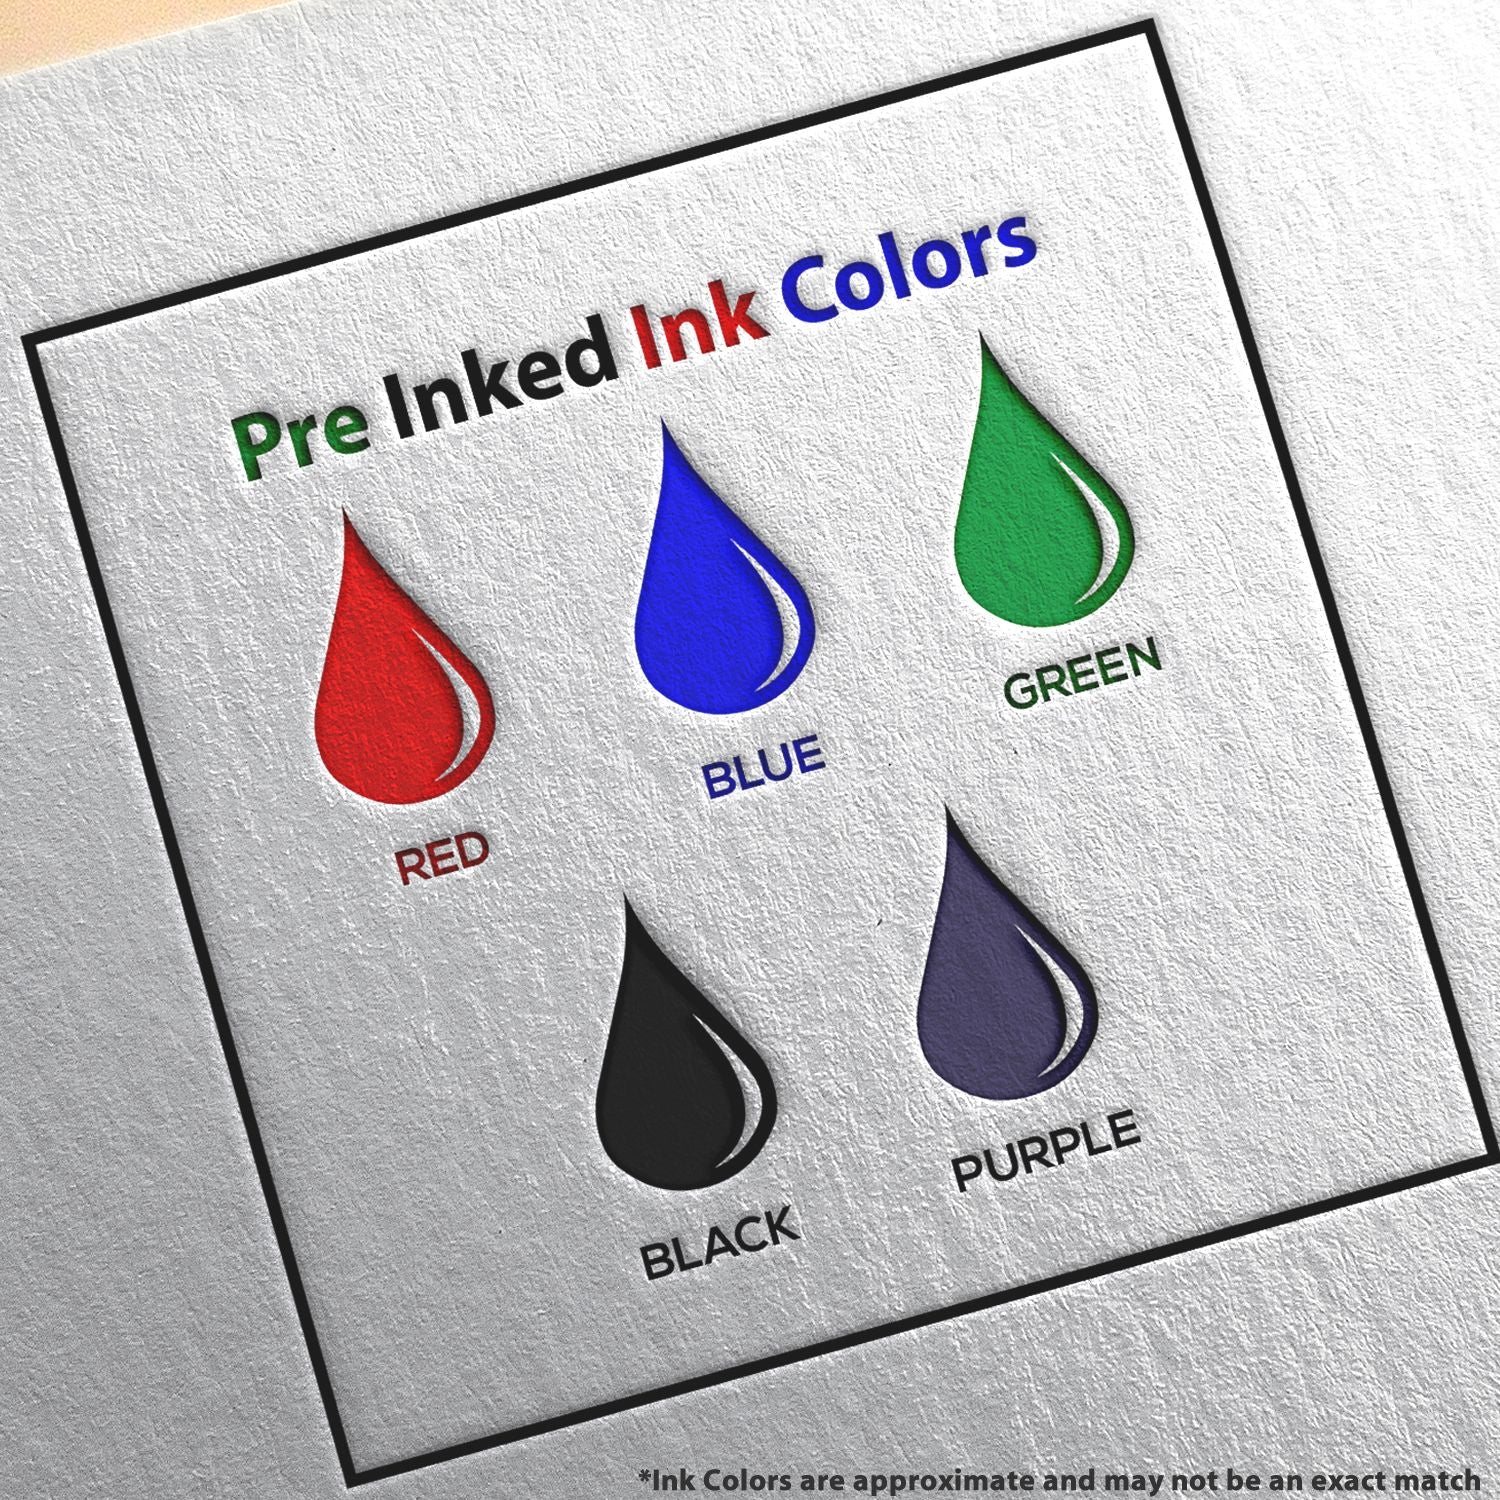 A picture showing the different ink colors or hues available for the Slim Pre-Inked Virginia Architect Seal Stamp product.